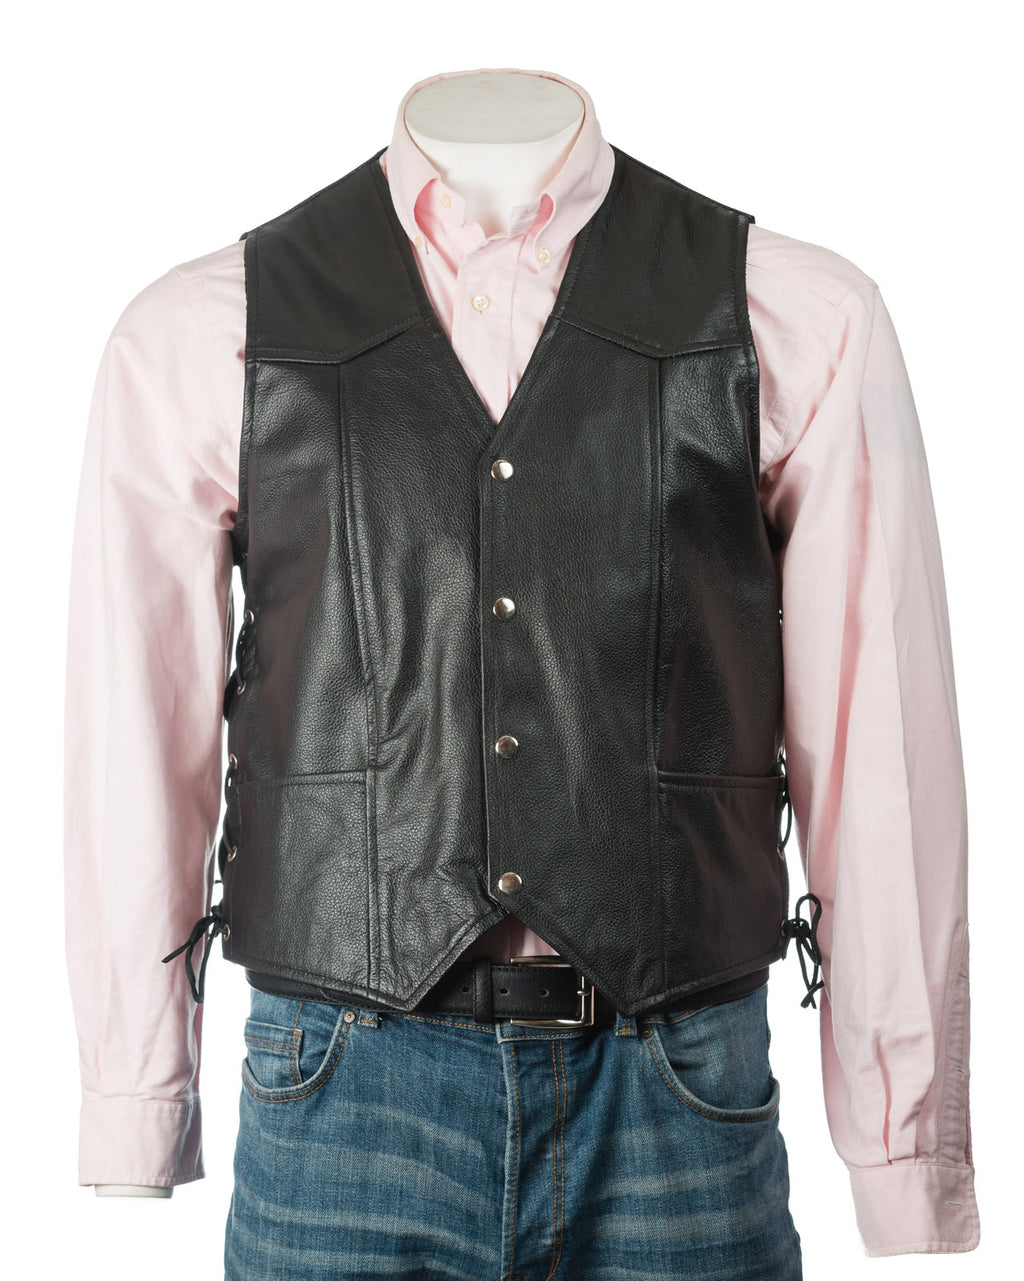 Men's Rough Finish Cow Hide Stud Fastening Leather Waistcoat With Lace-Up Sides: Giorgio